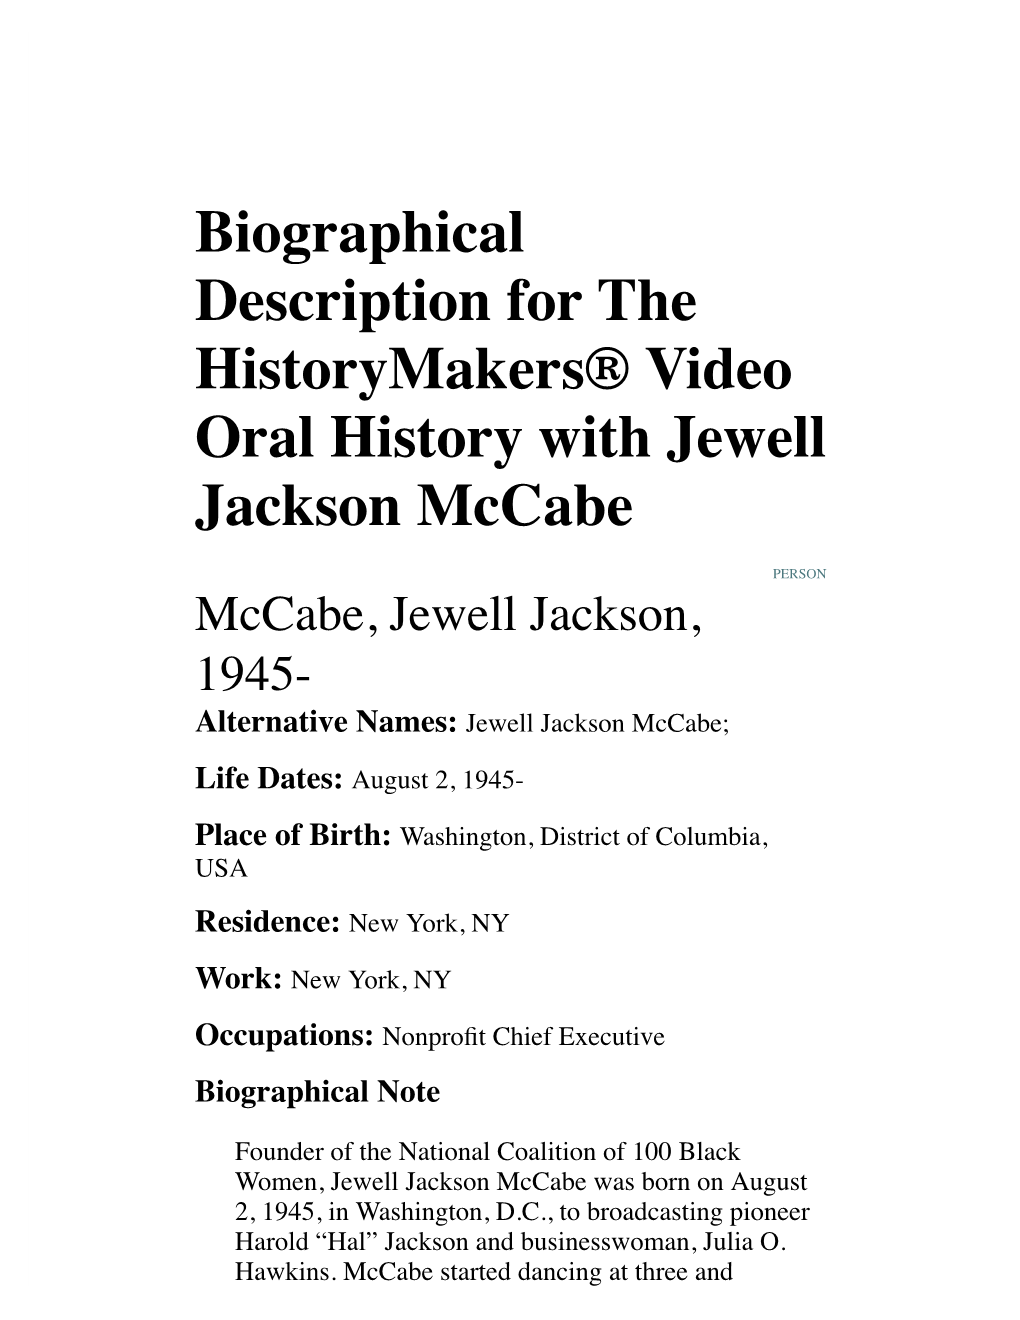 Biographical Description for the Historymakers® Video Oral History with Jewell Jackson Mccabe